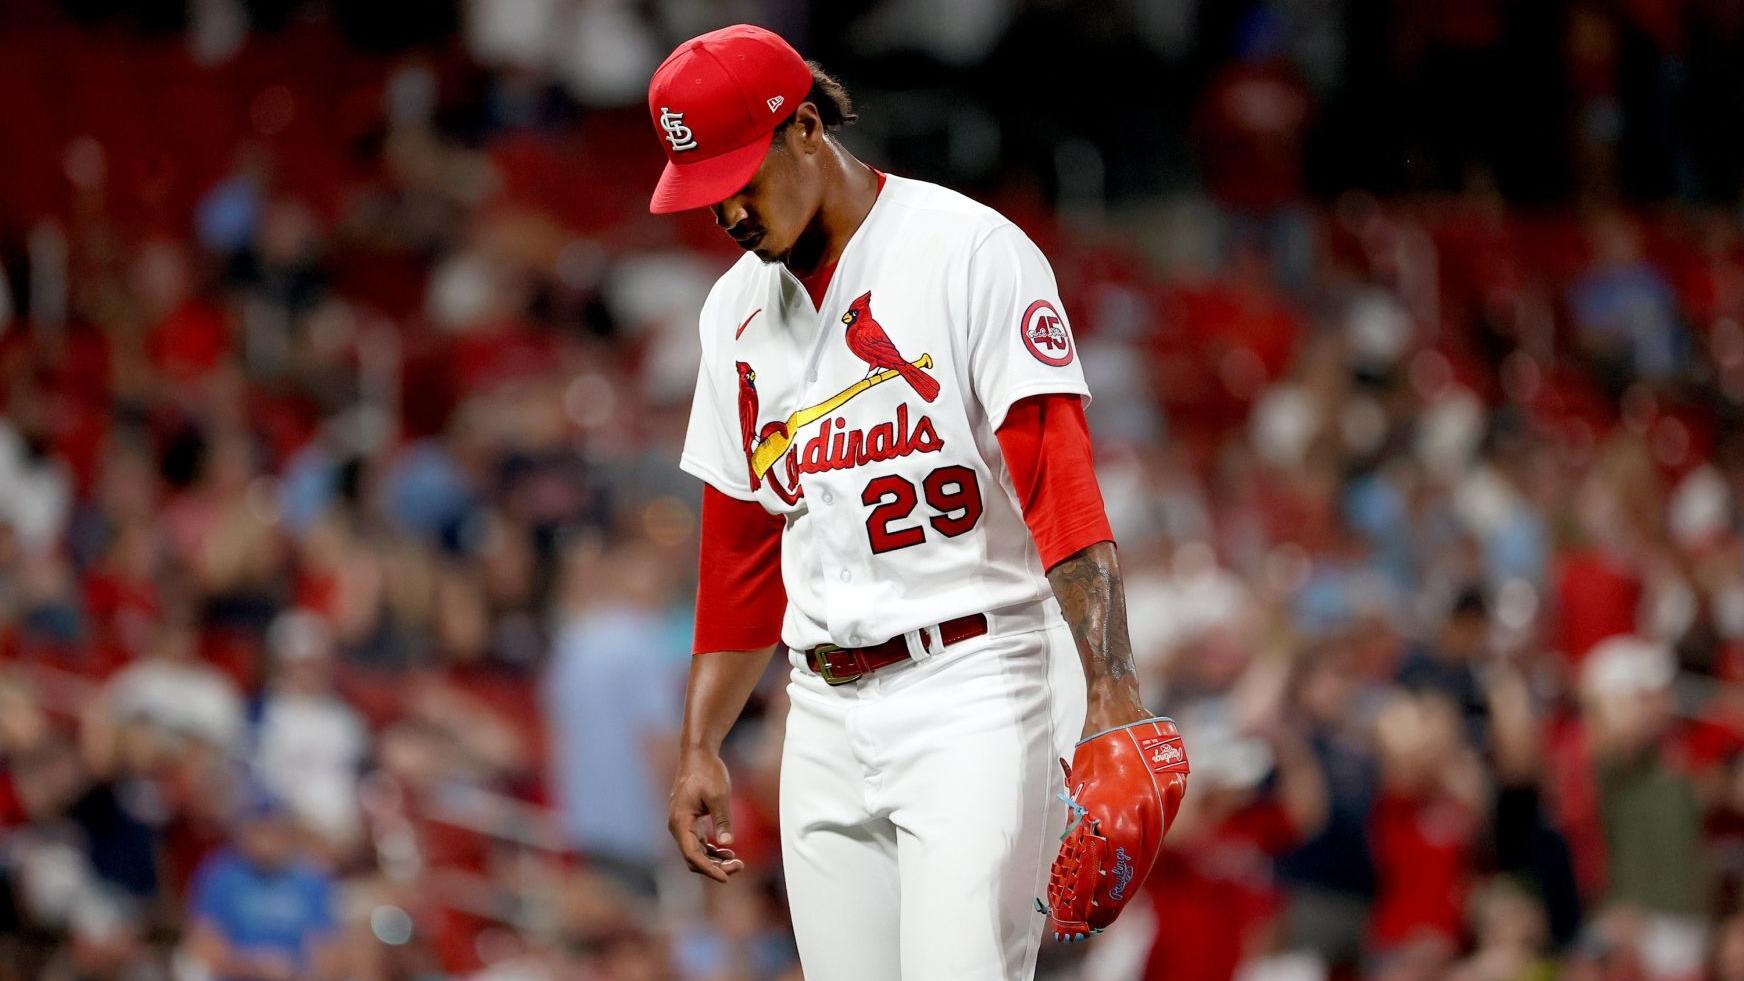 Cardinals allow Alex Reyes, a soaring prospect grounded by injuries, to become free agent